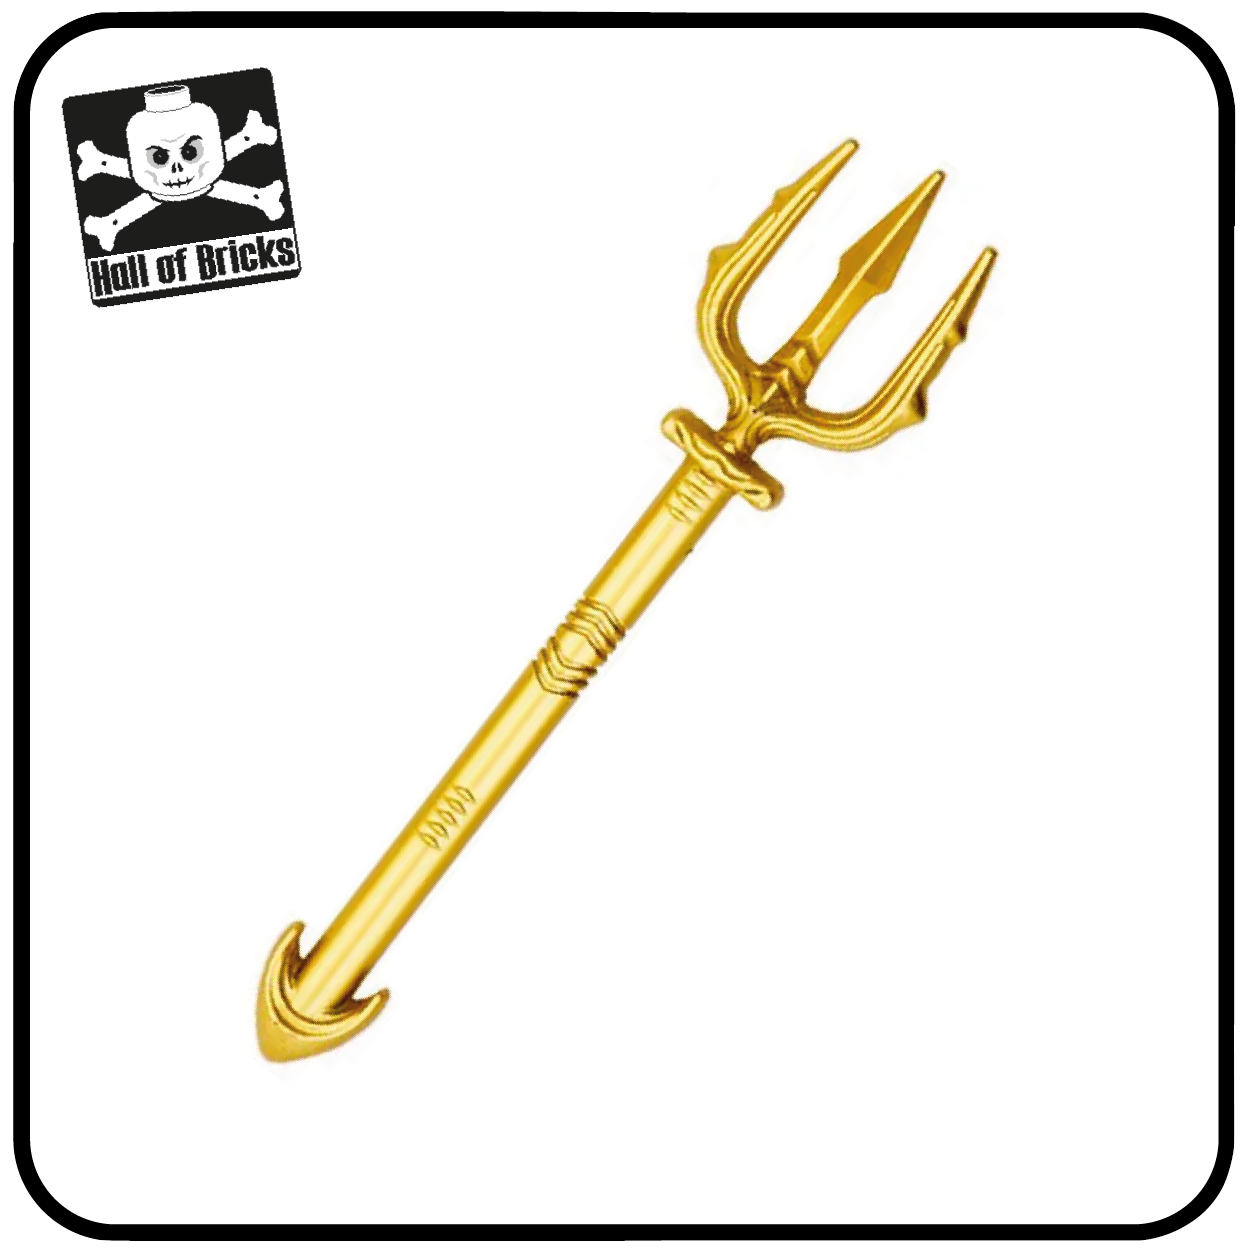 HoB Weapon Trident gold